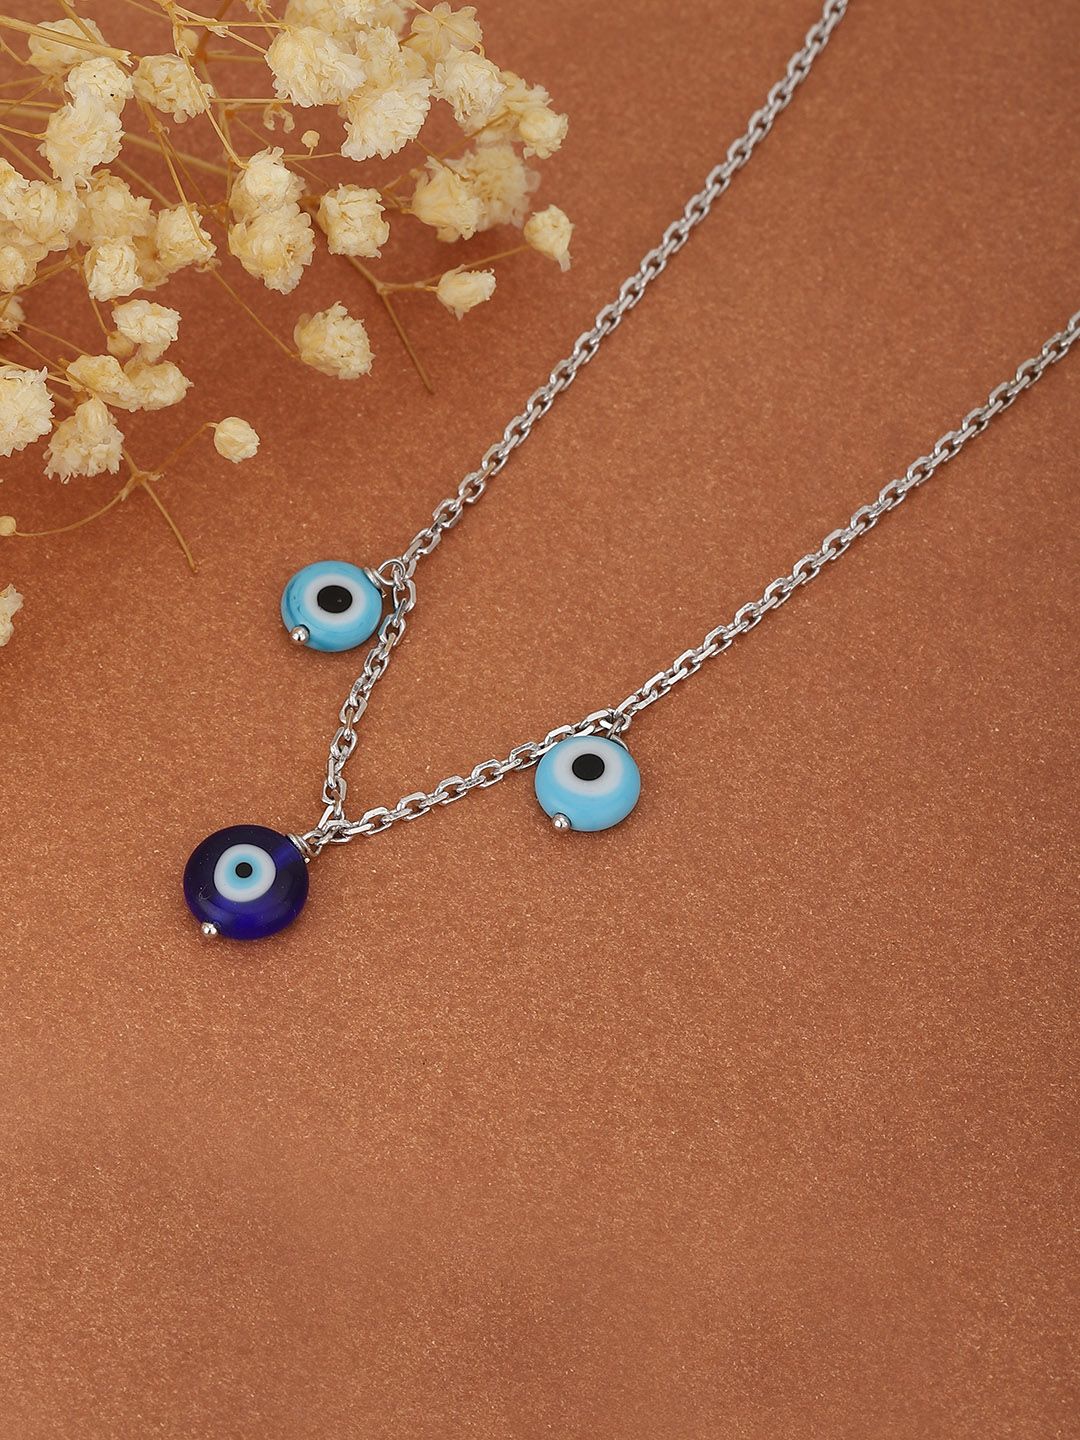 Carlton London Silver-Toned & Blue Rhodium-Plated Evil Eye Necklace Price in India